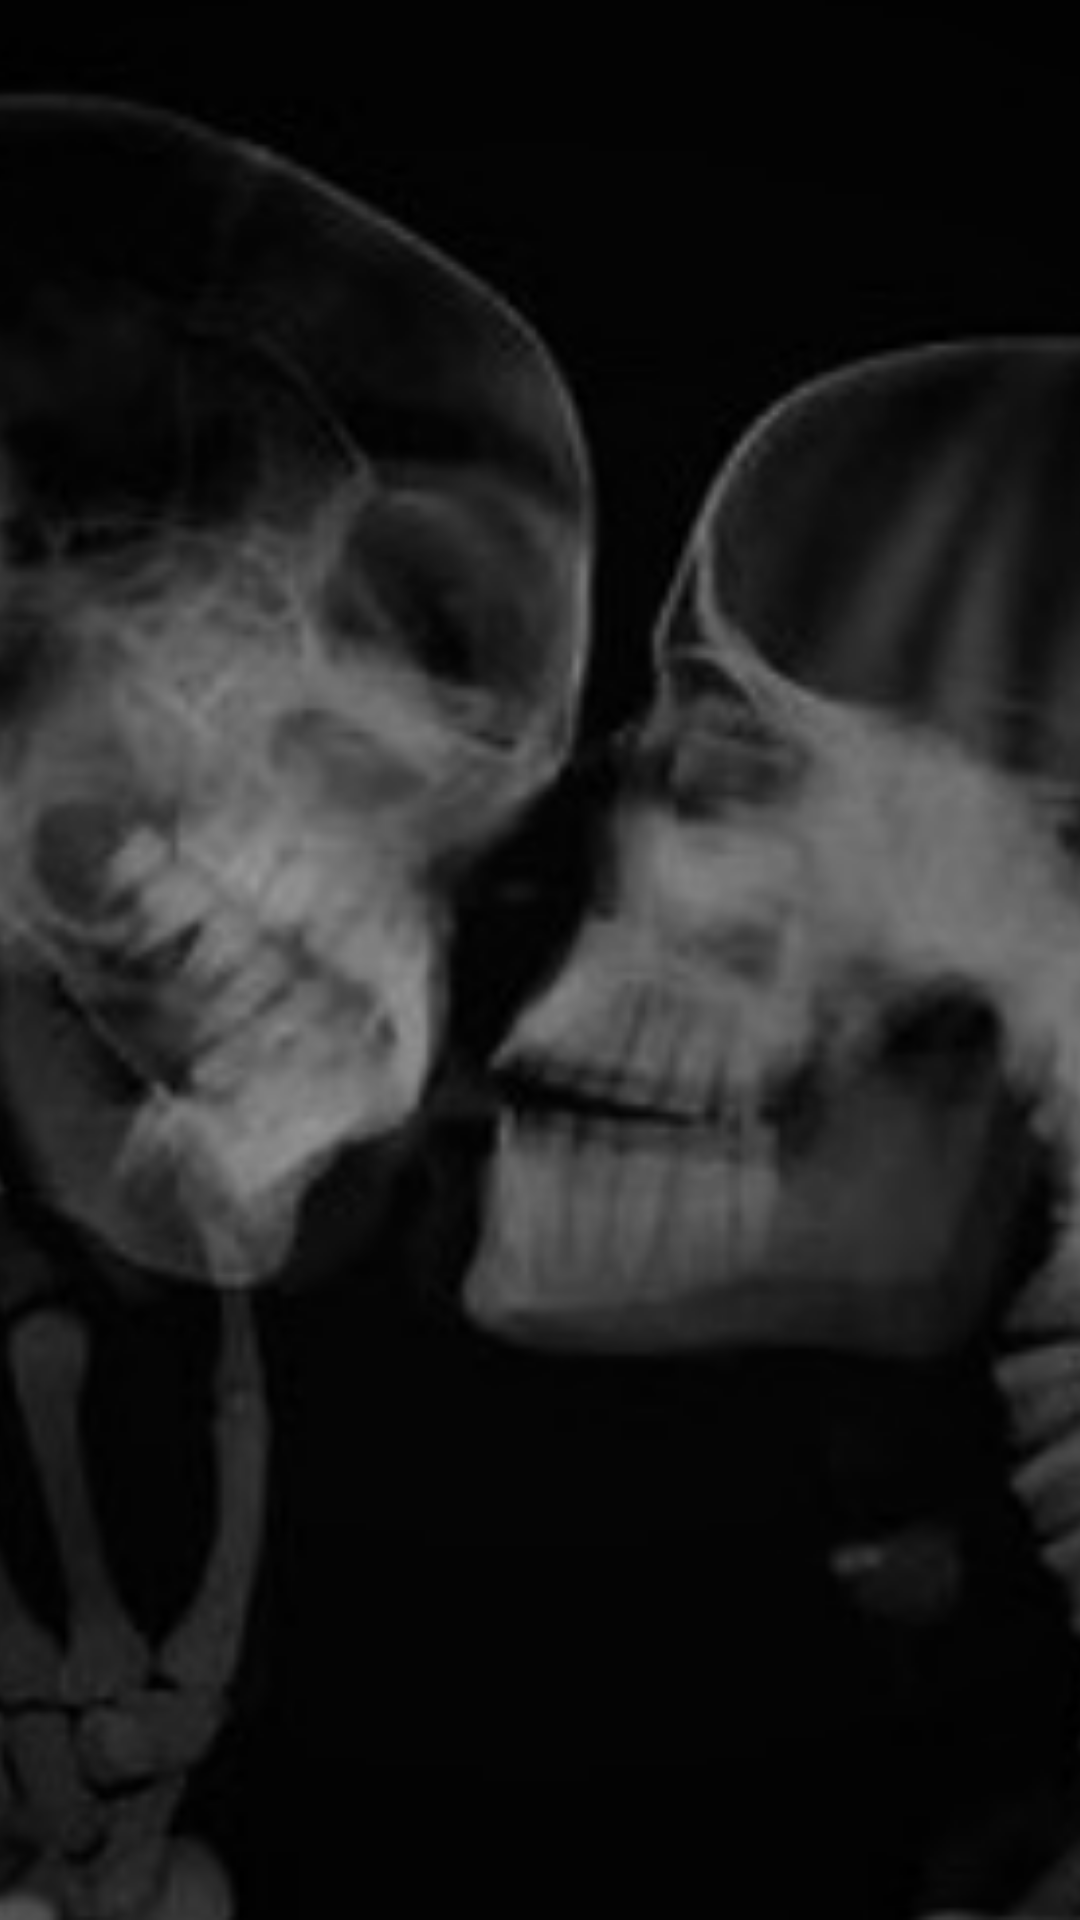 A pair of skeletons kissing in black and white - Skeleton